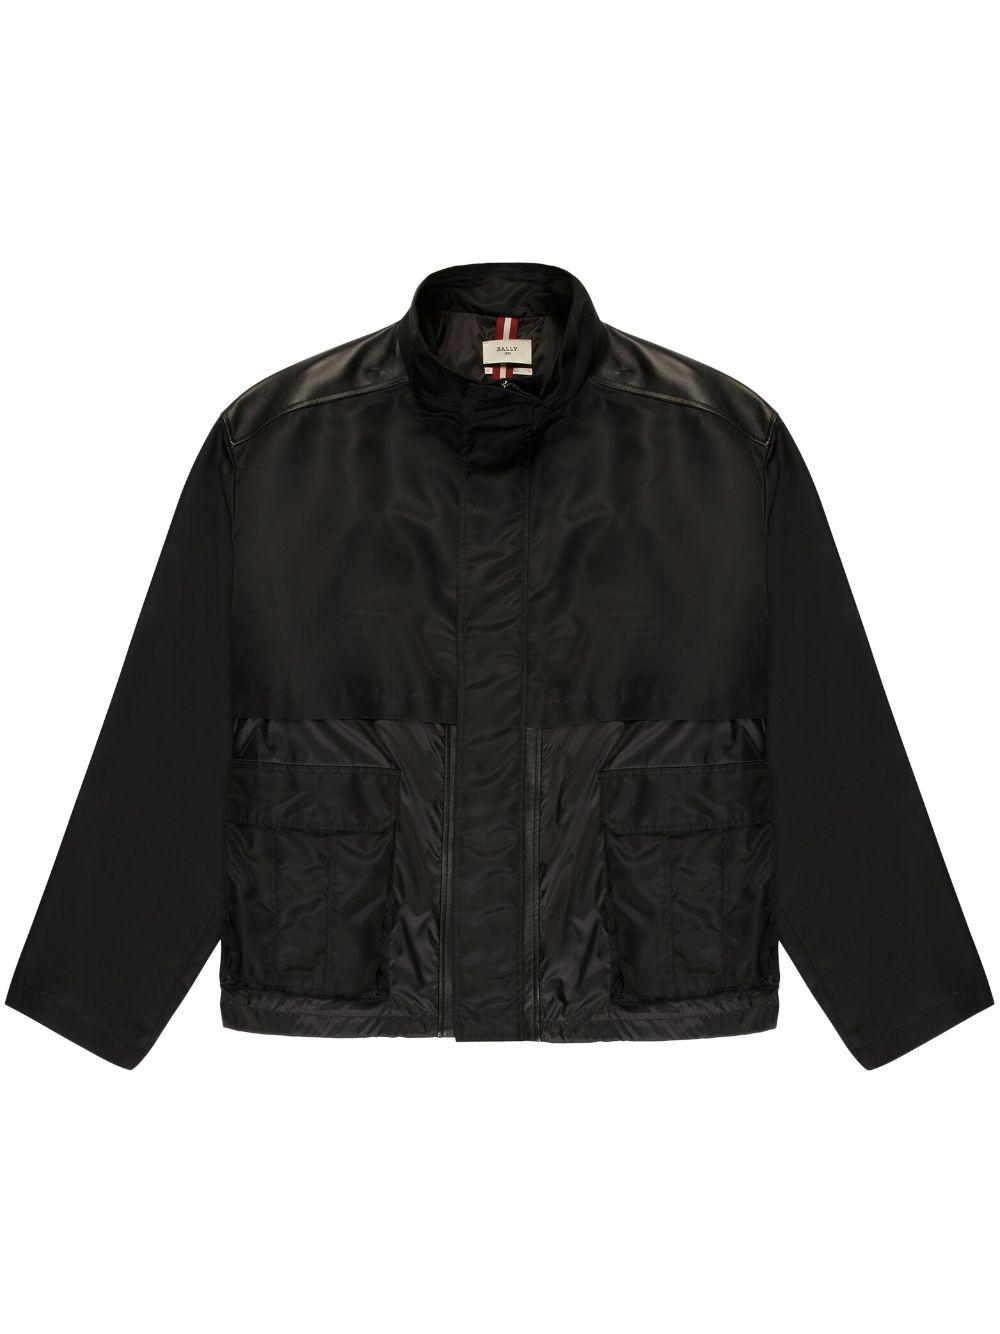 Bally Stand-up Collar Bomber Jacket in Black for Men | Lyst UK